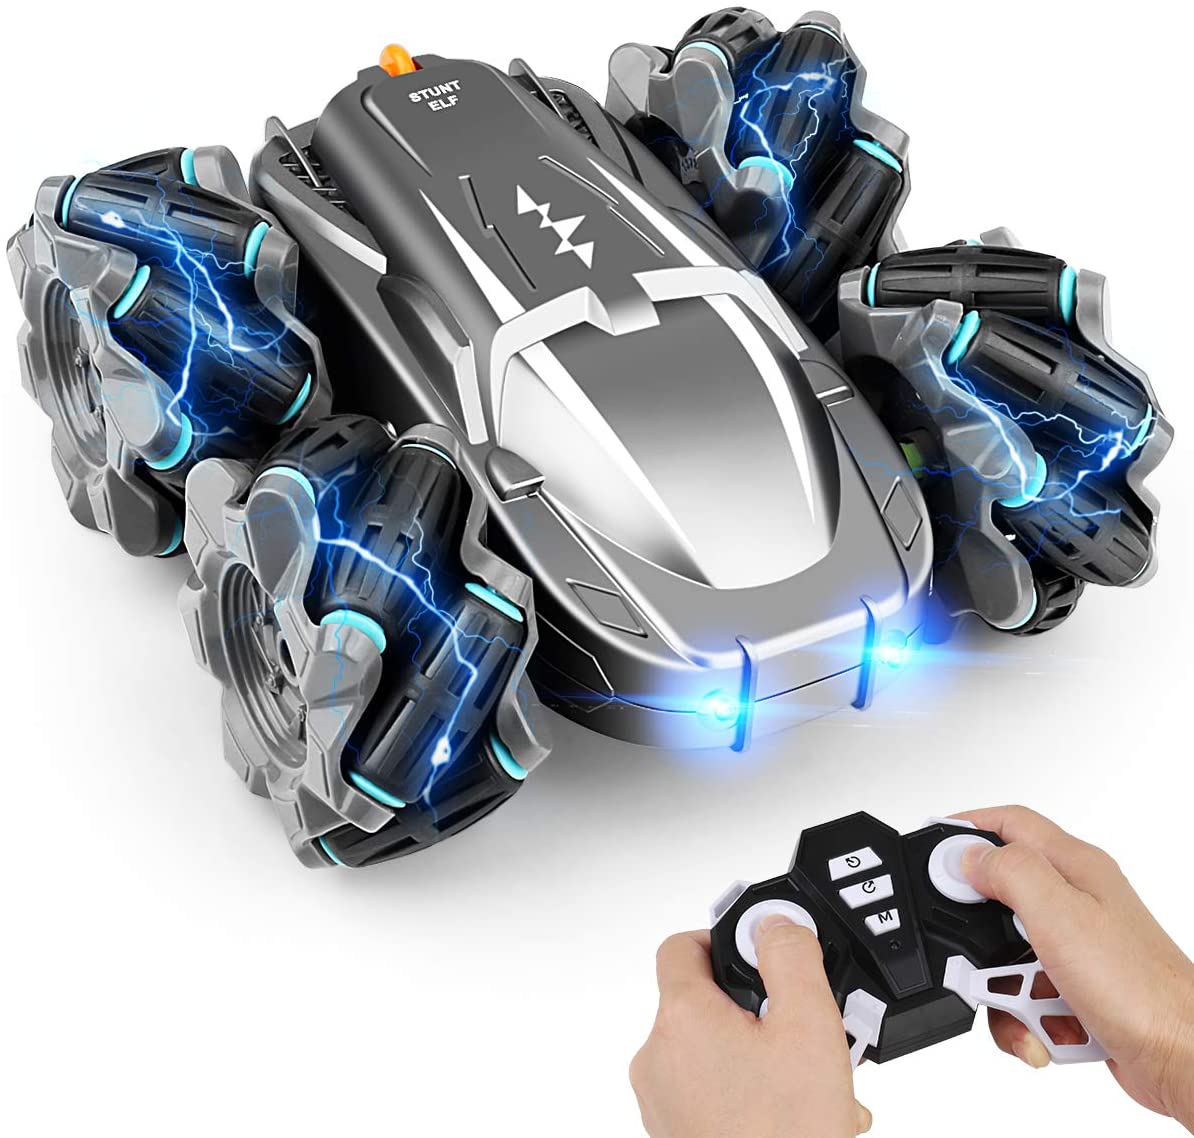 Stunt Elves Top Speed & Dazzling Remote Control Stunt Car Rechargeable RC Car, 360°Rotating Double Sided Flips 4WD Remote Control Car Electric Race Stunt Toy Car 2.4Ghz Off-Road Racing Vehicles for Kids Boys Girls Birthday 